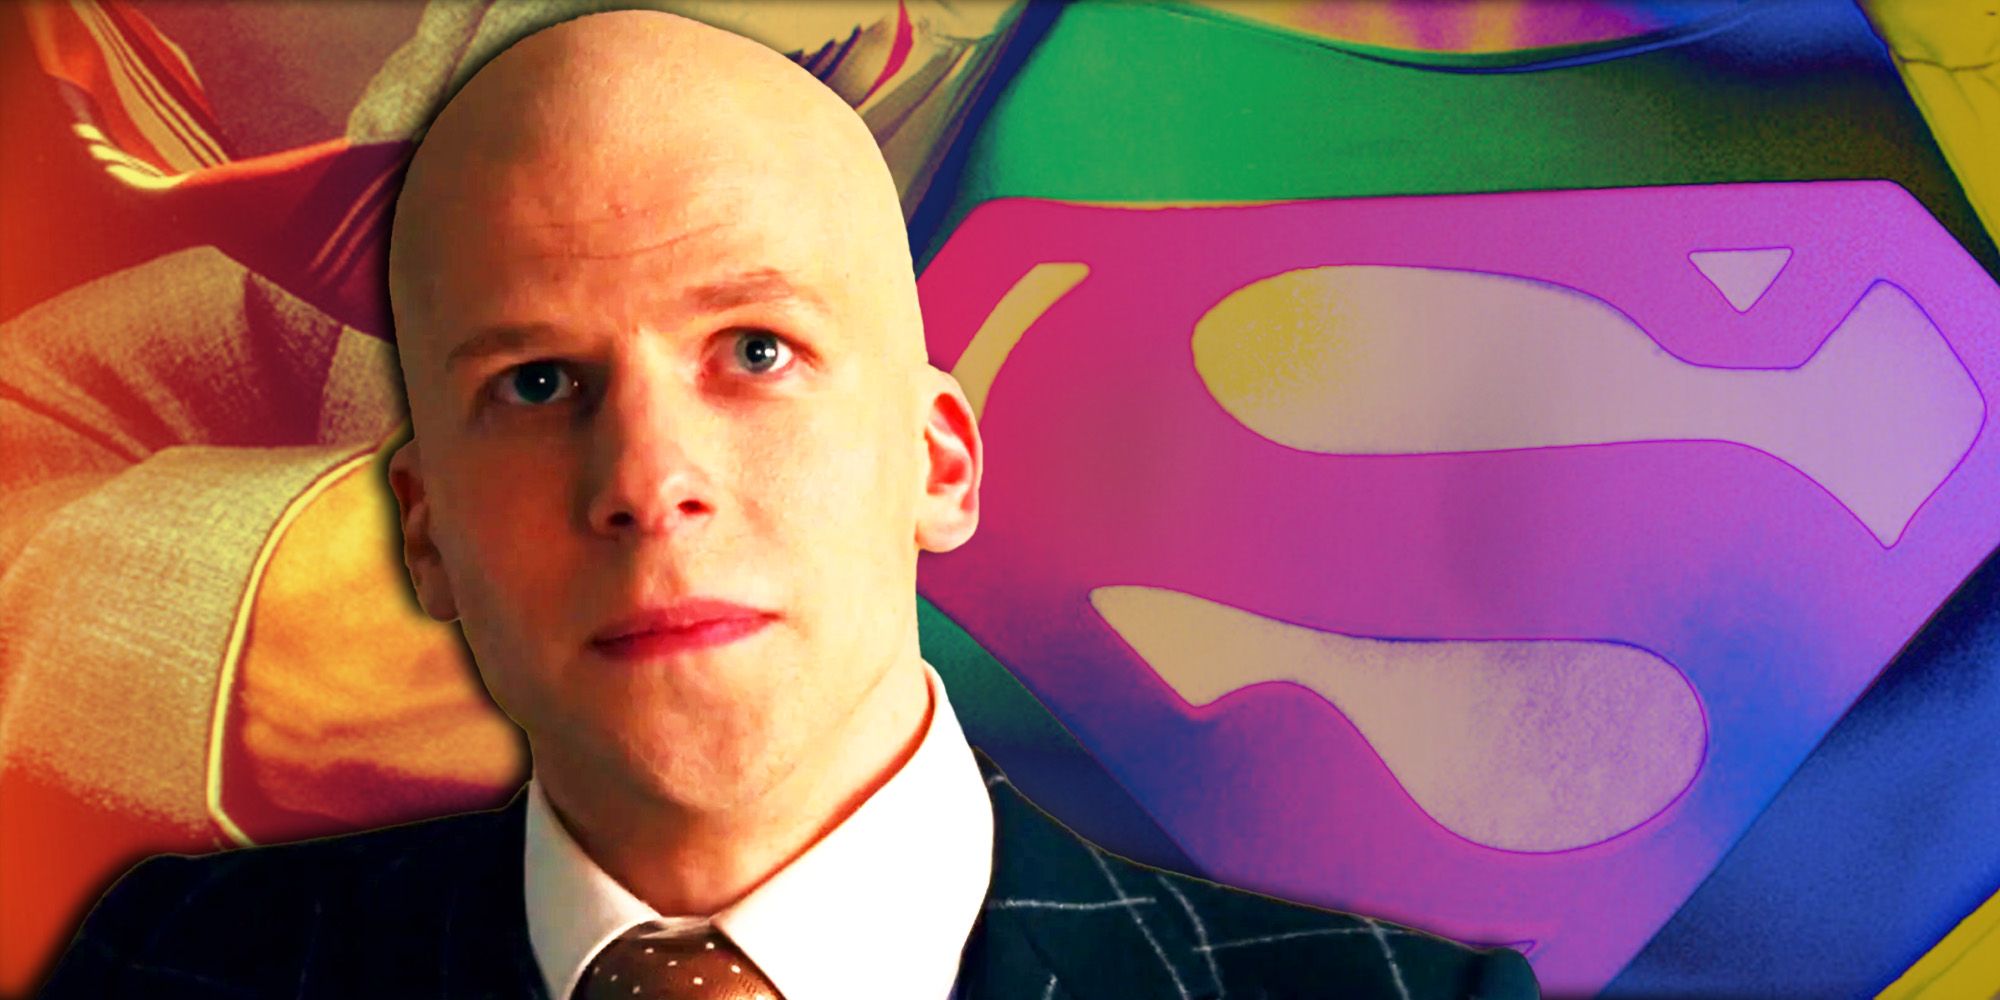 Jesse Eisenberg as DCEU Lex Luthor in front of comic art of Superman's logo